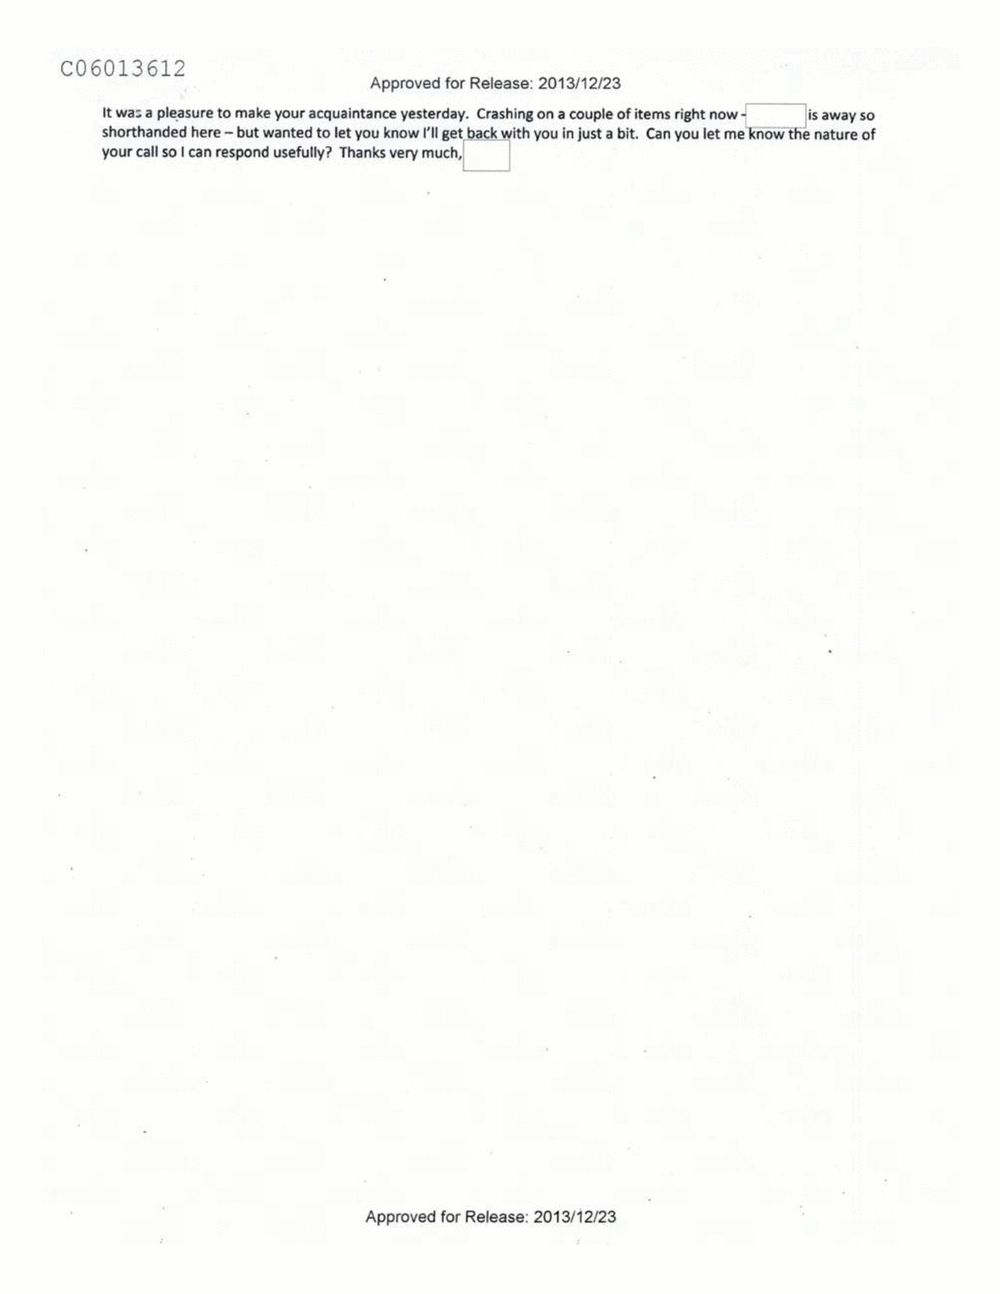 Page 432 from Email Correspondence Between Reporters and CIA Flacks